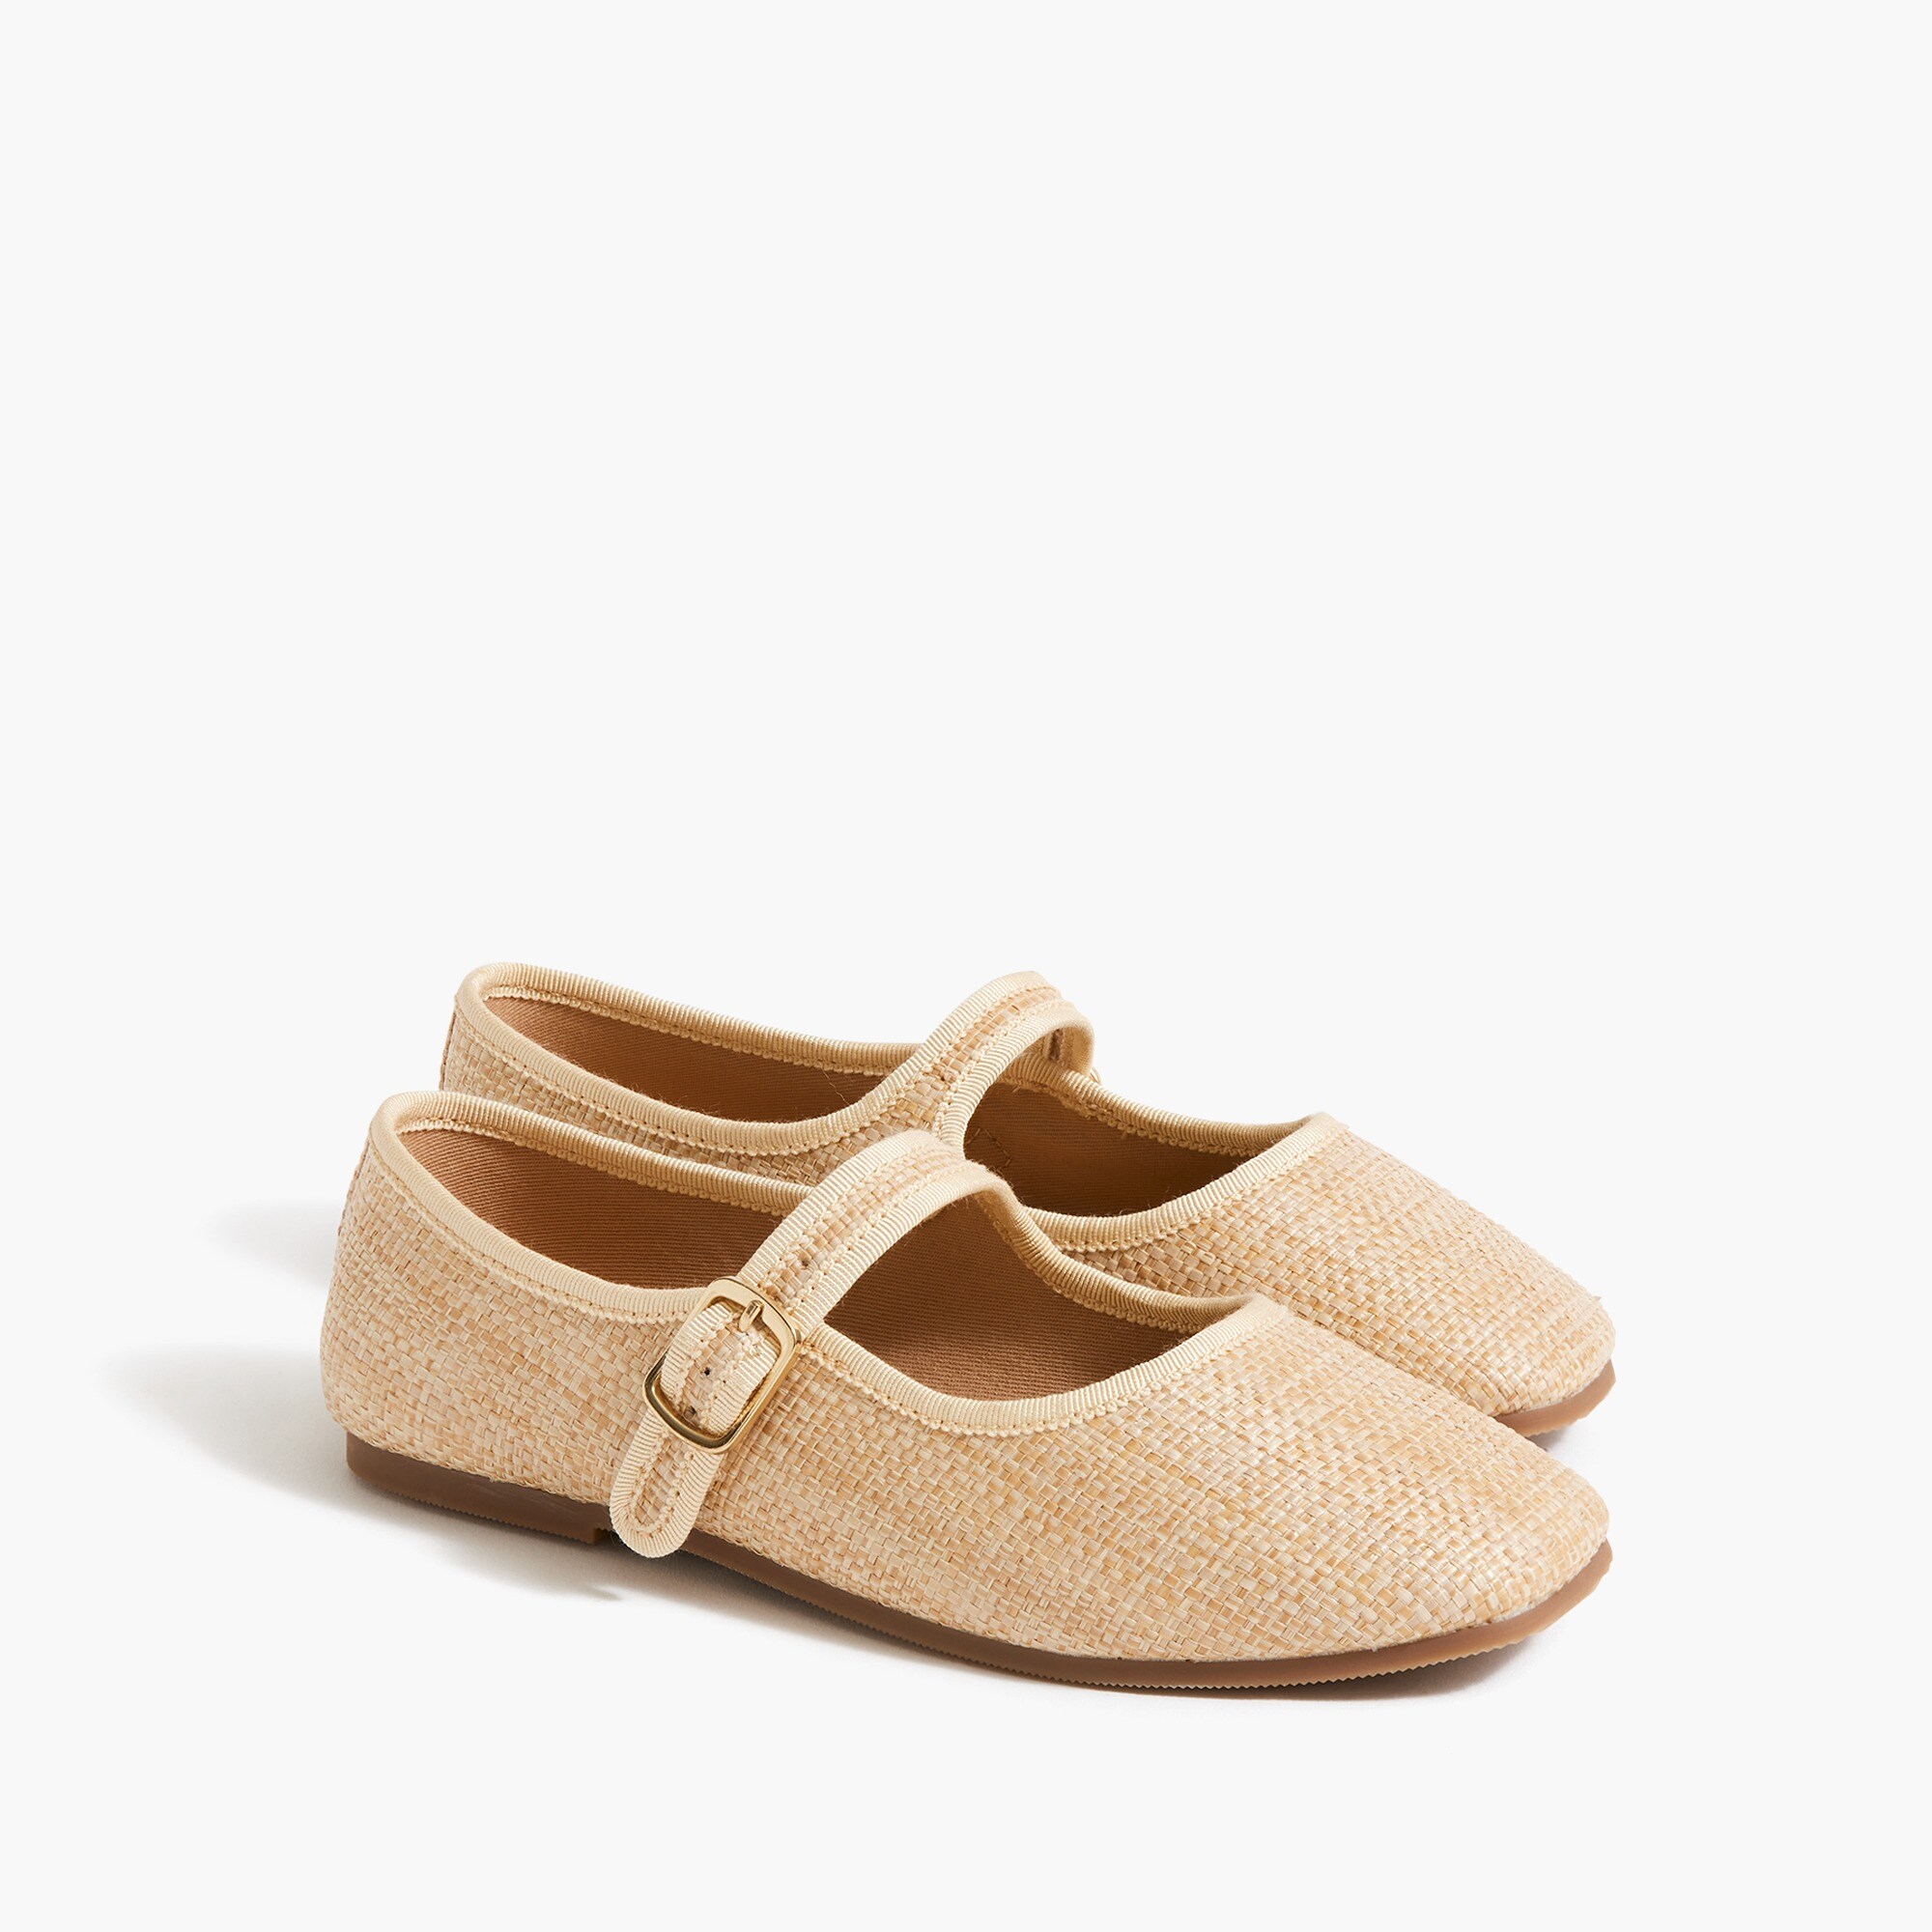  Girls' woven Mary Janes